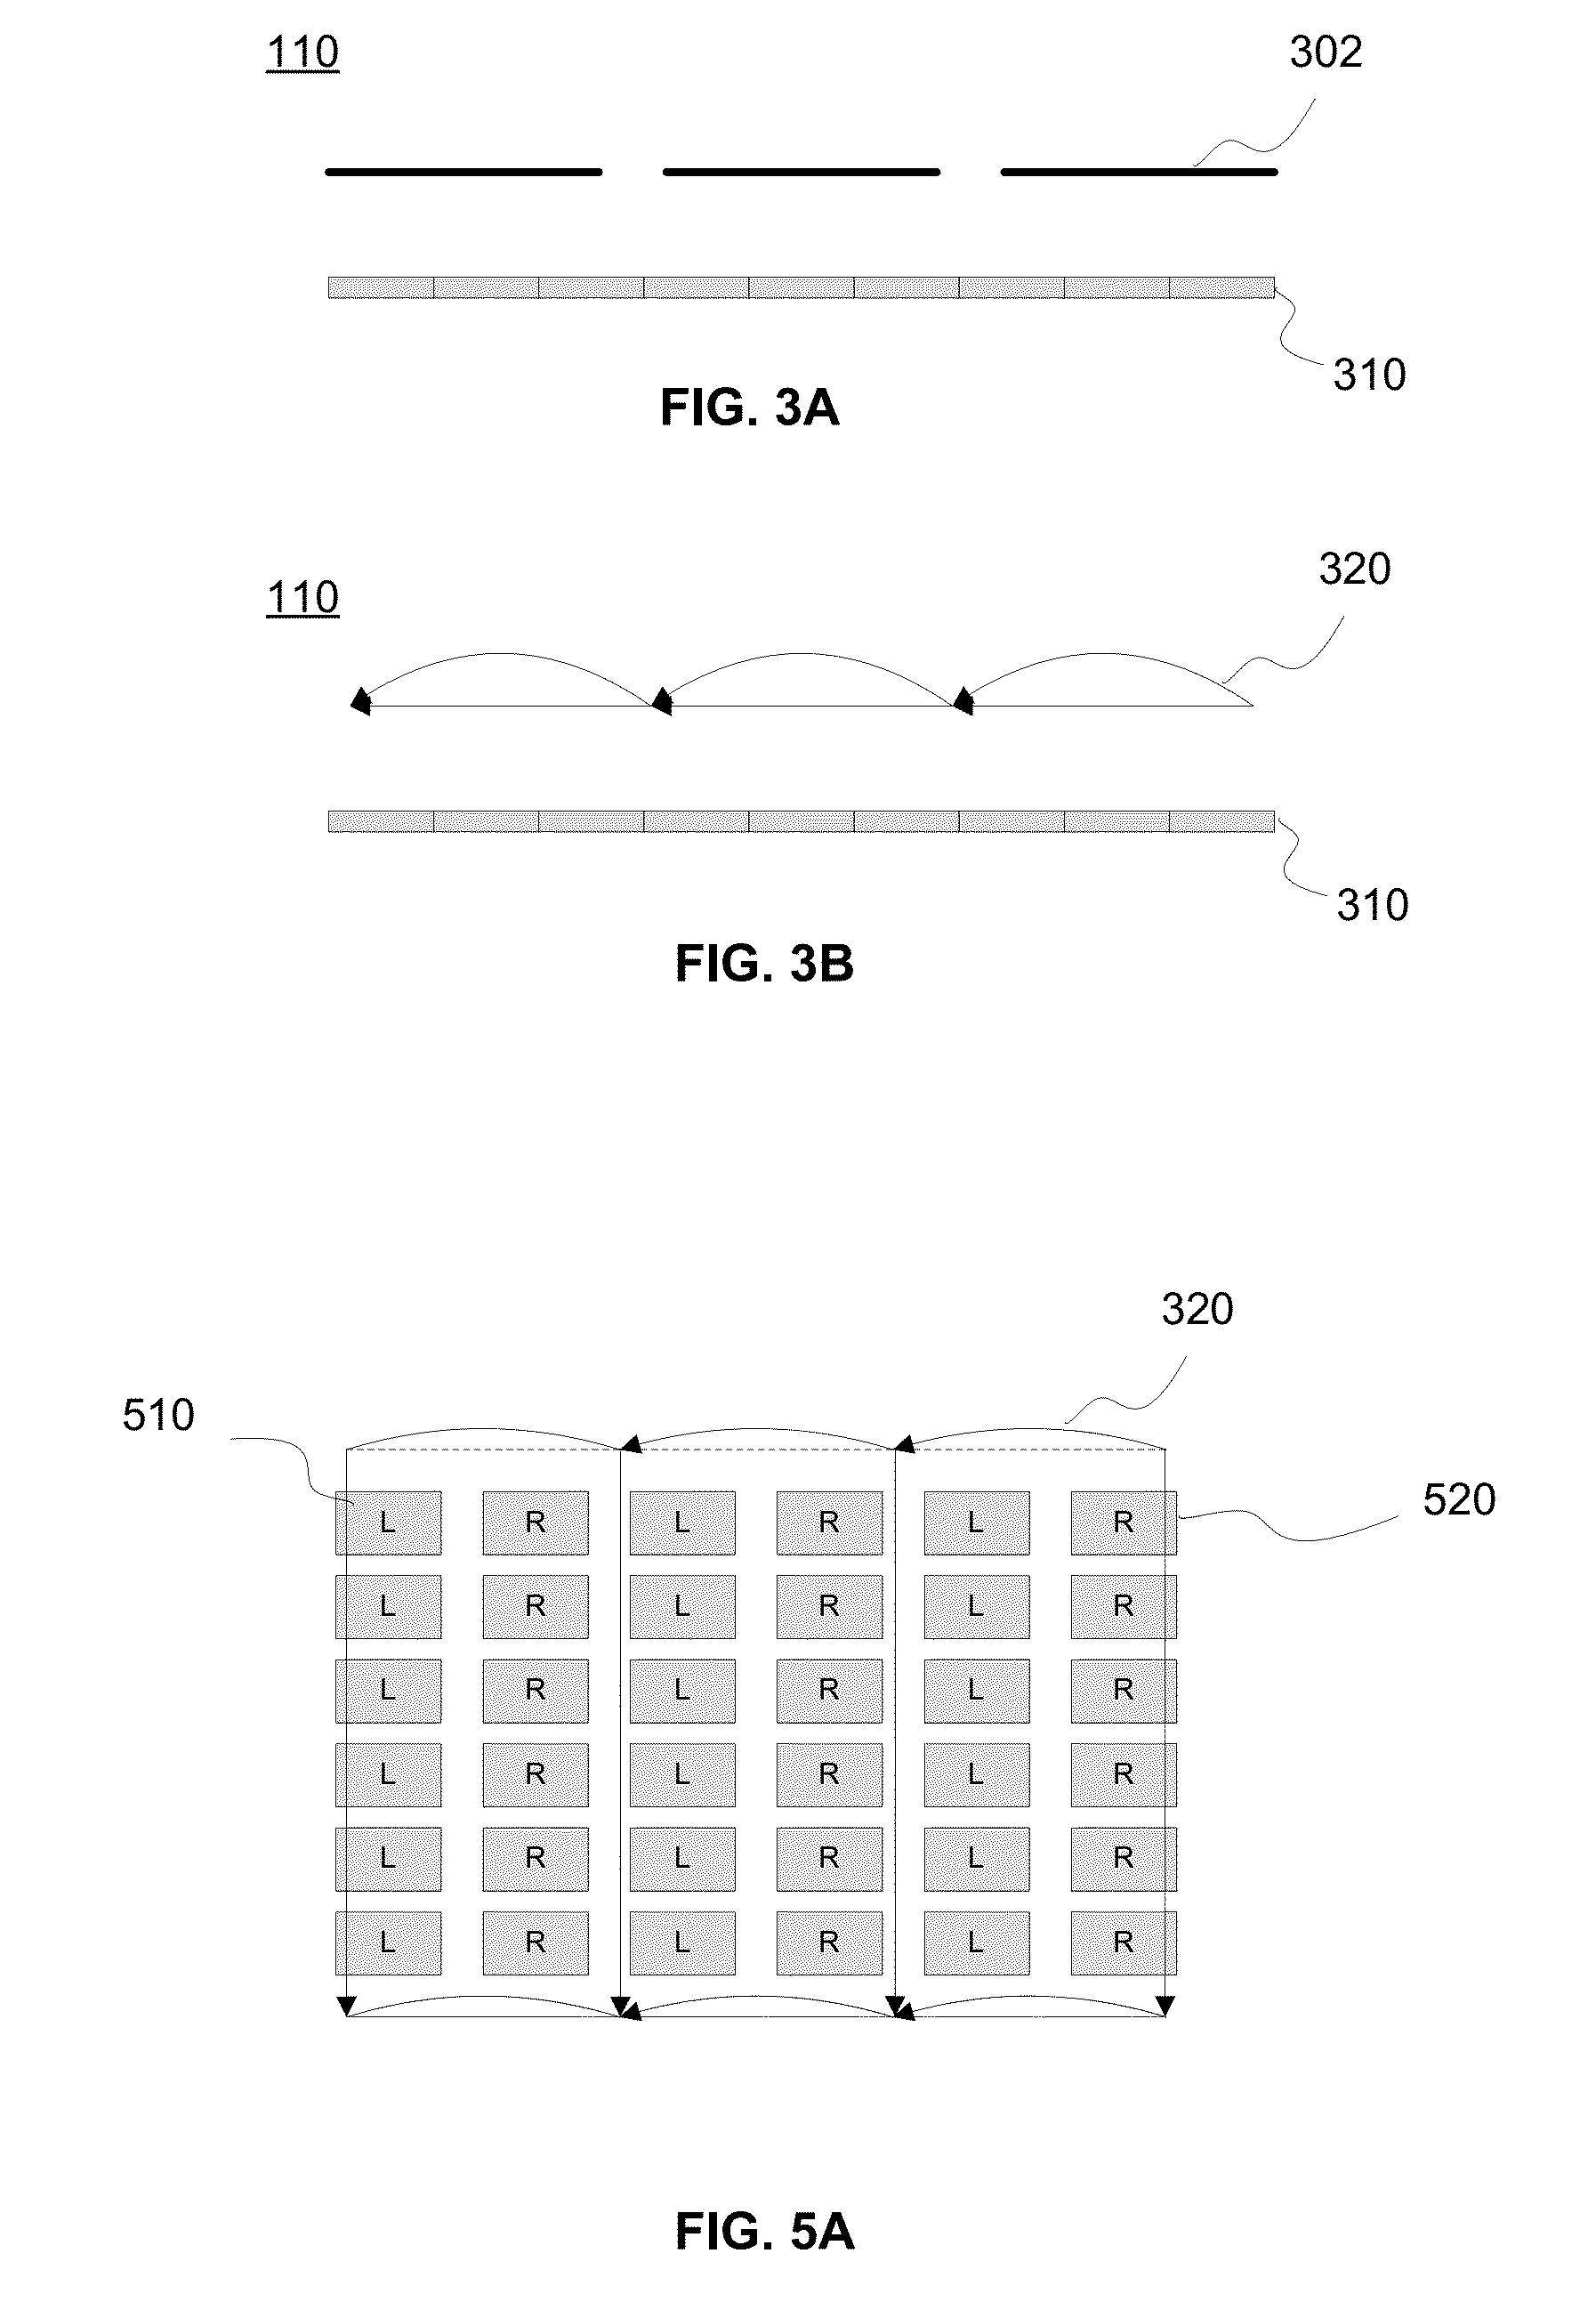 Autostereoscopic display method and system